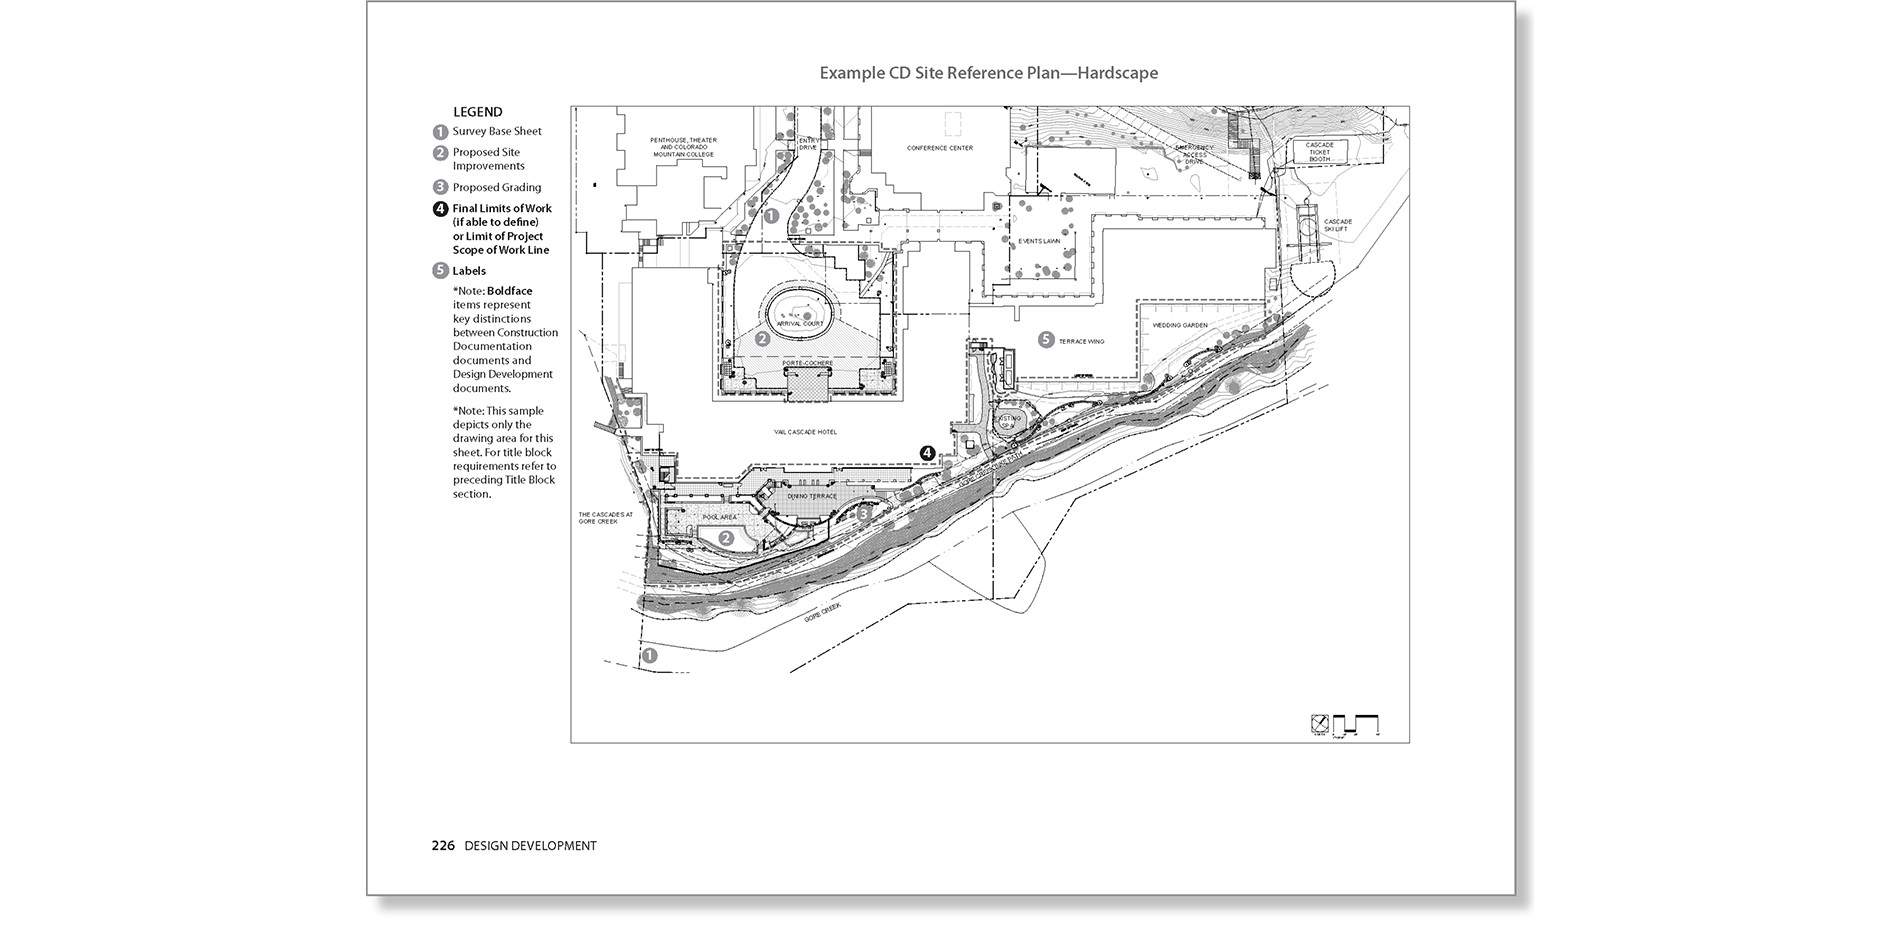 Site Reference Plan Example